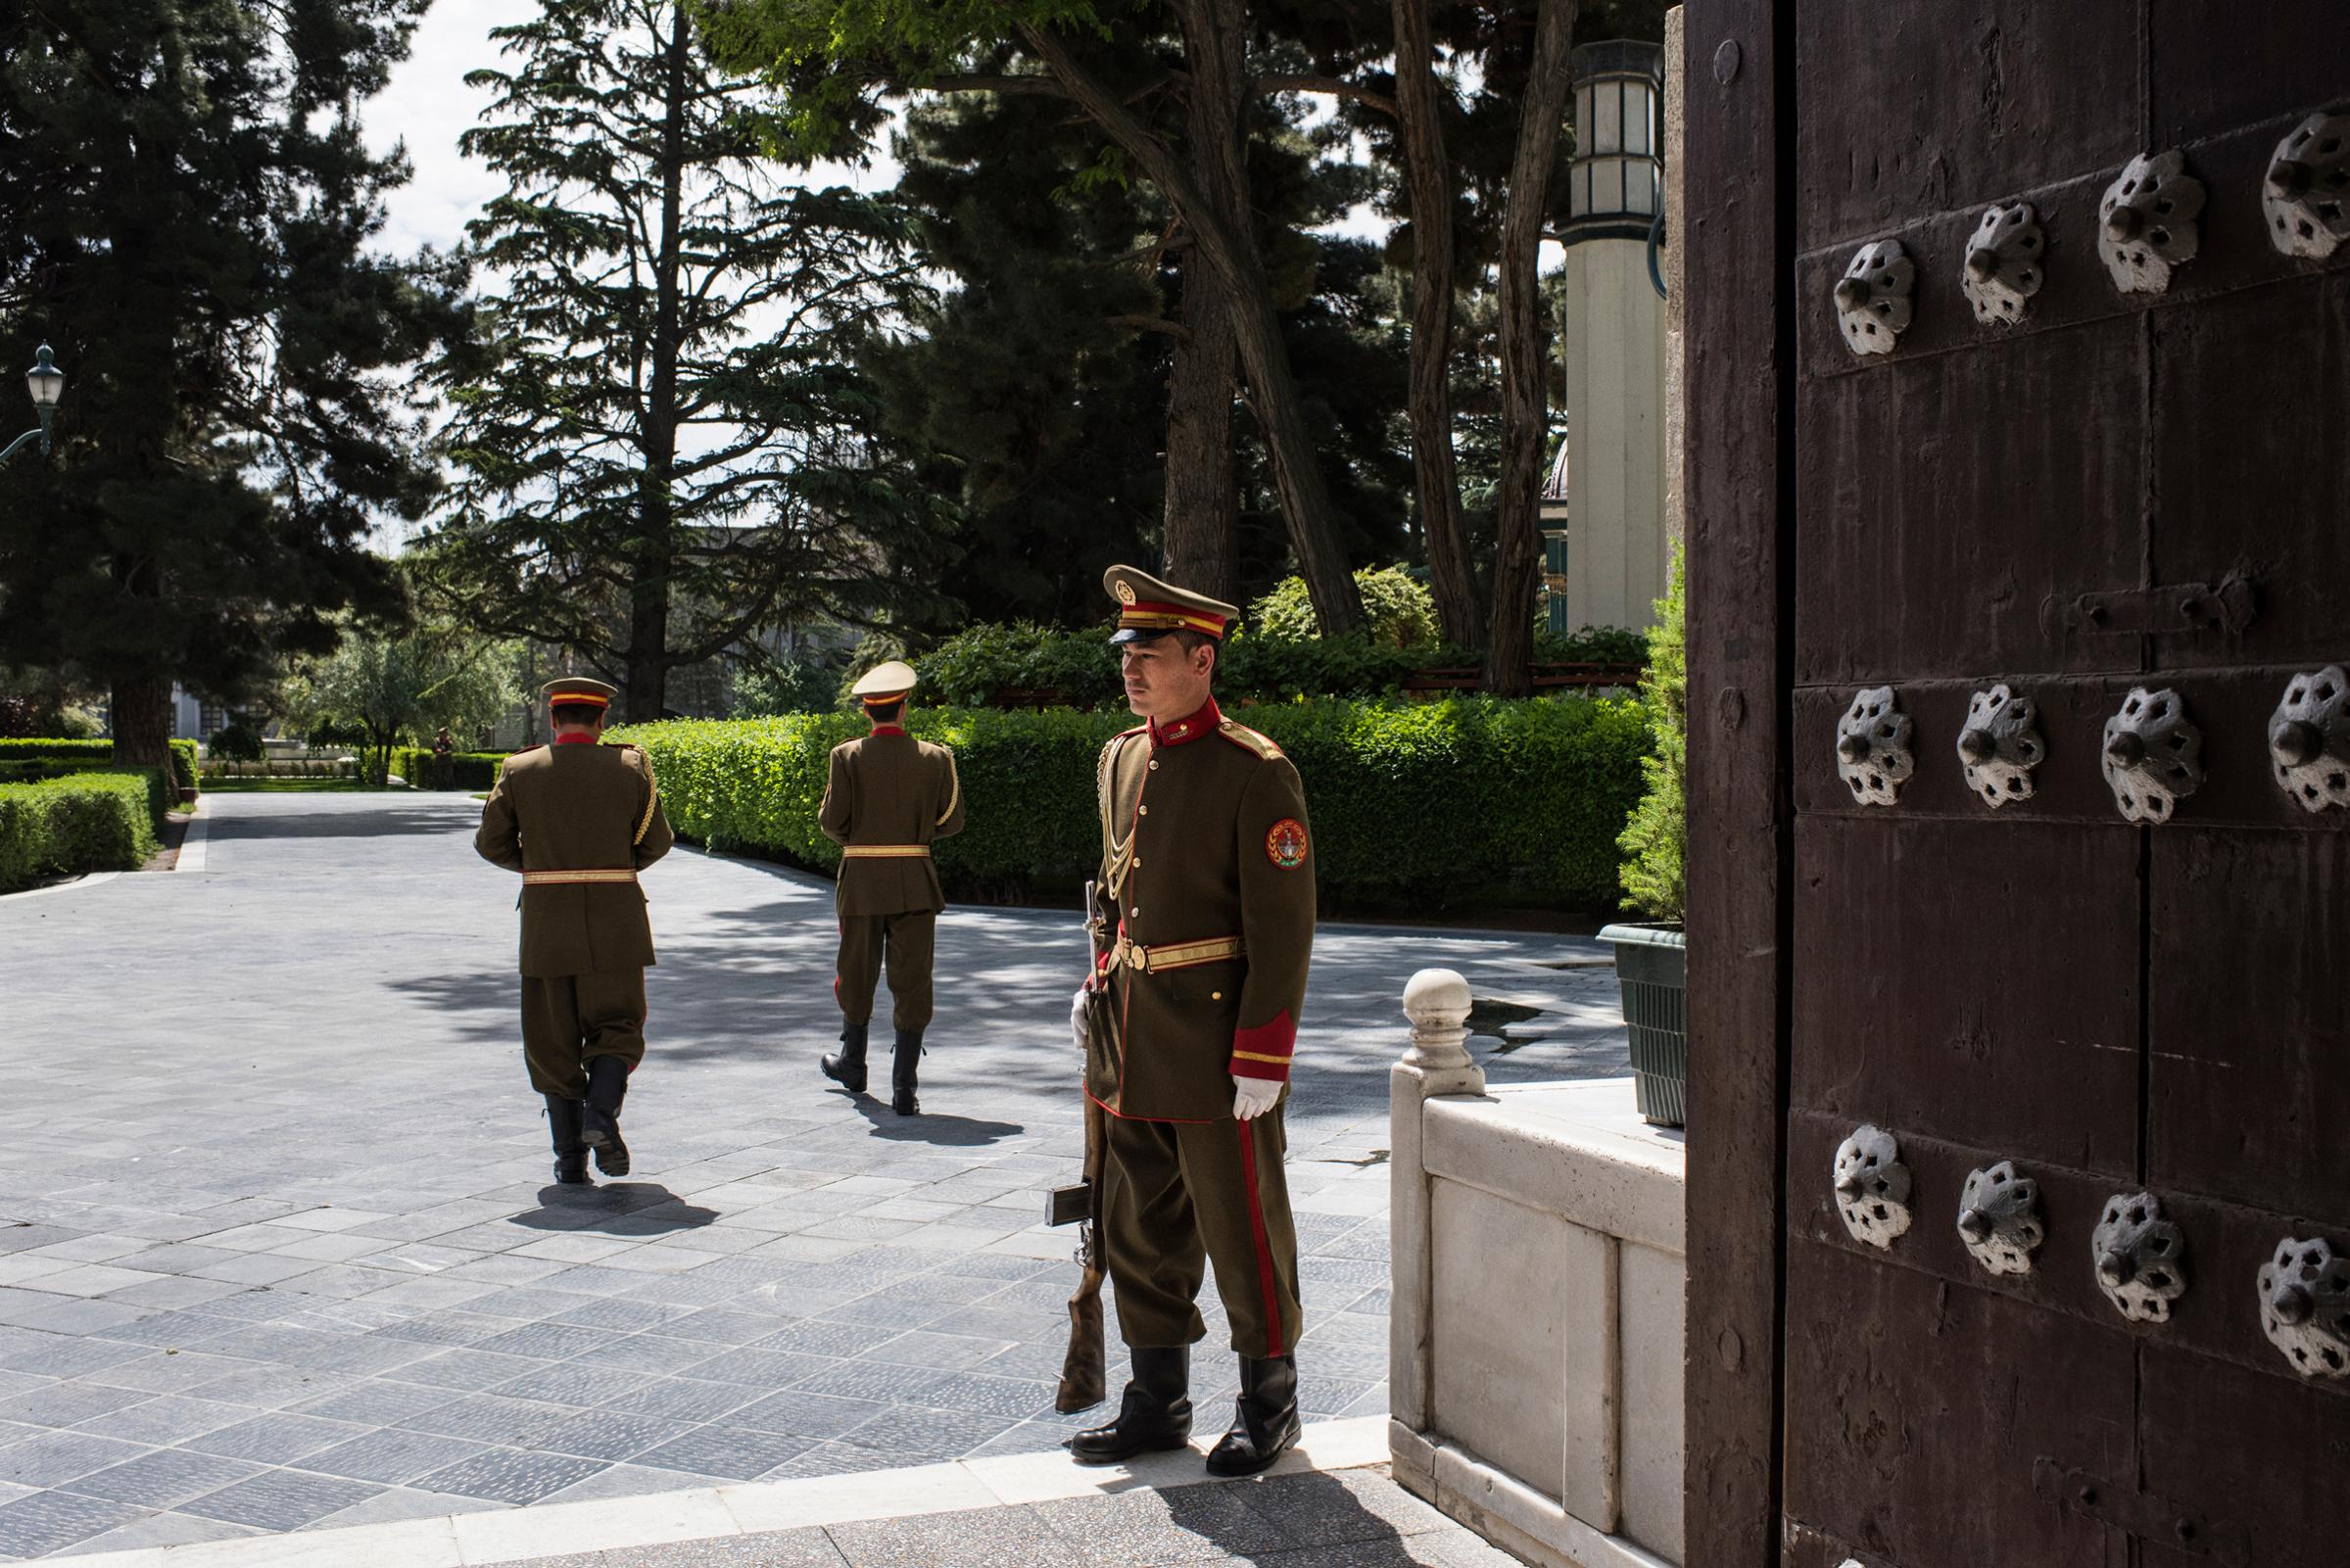 A presidential guard stands watch inside the palace compound in Kabul on May 11, 2017.